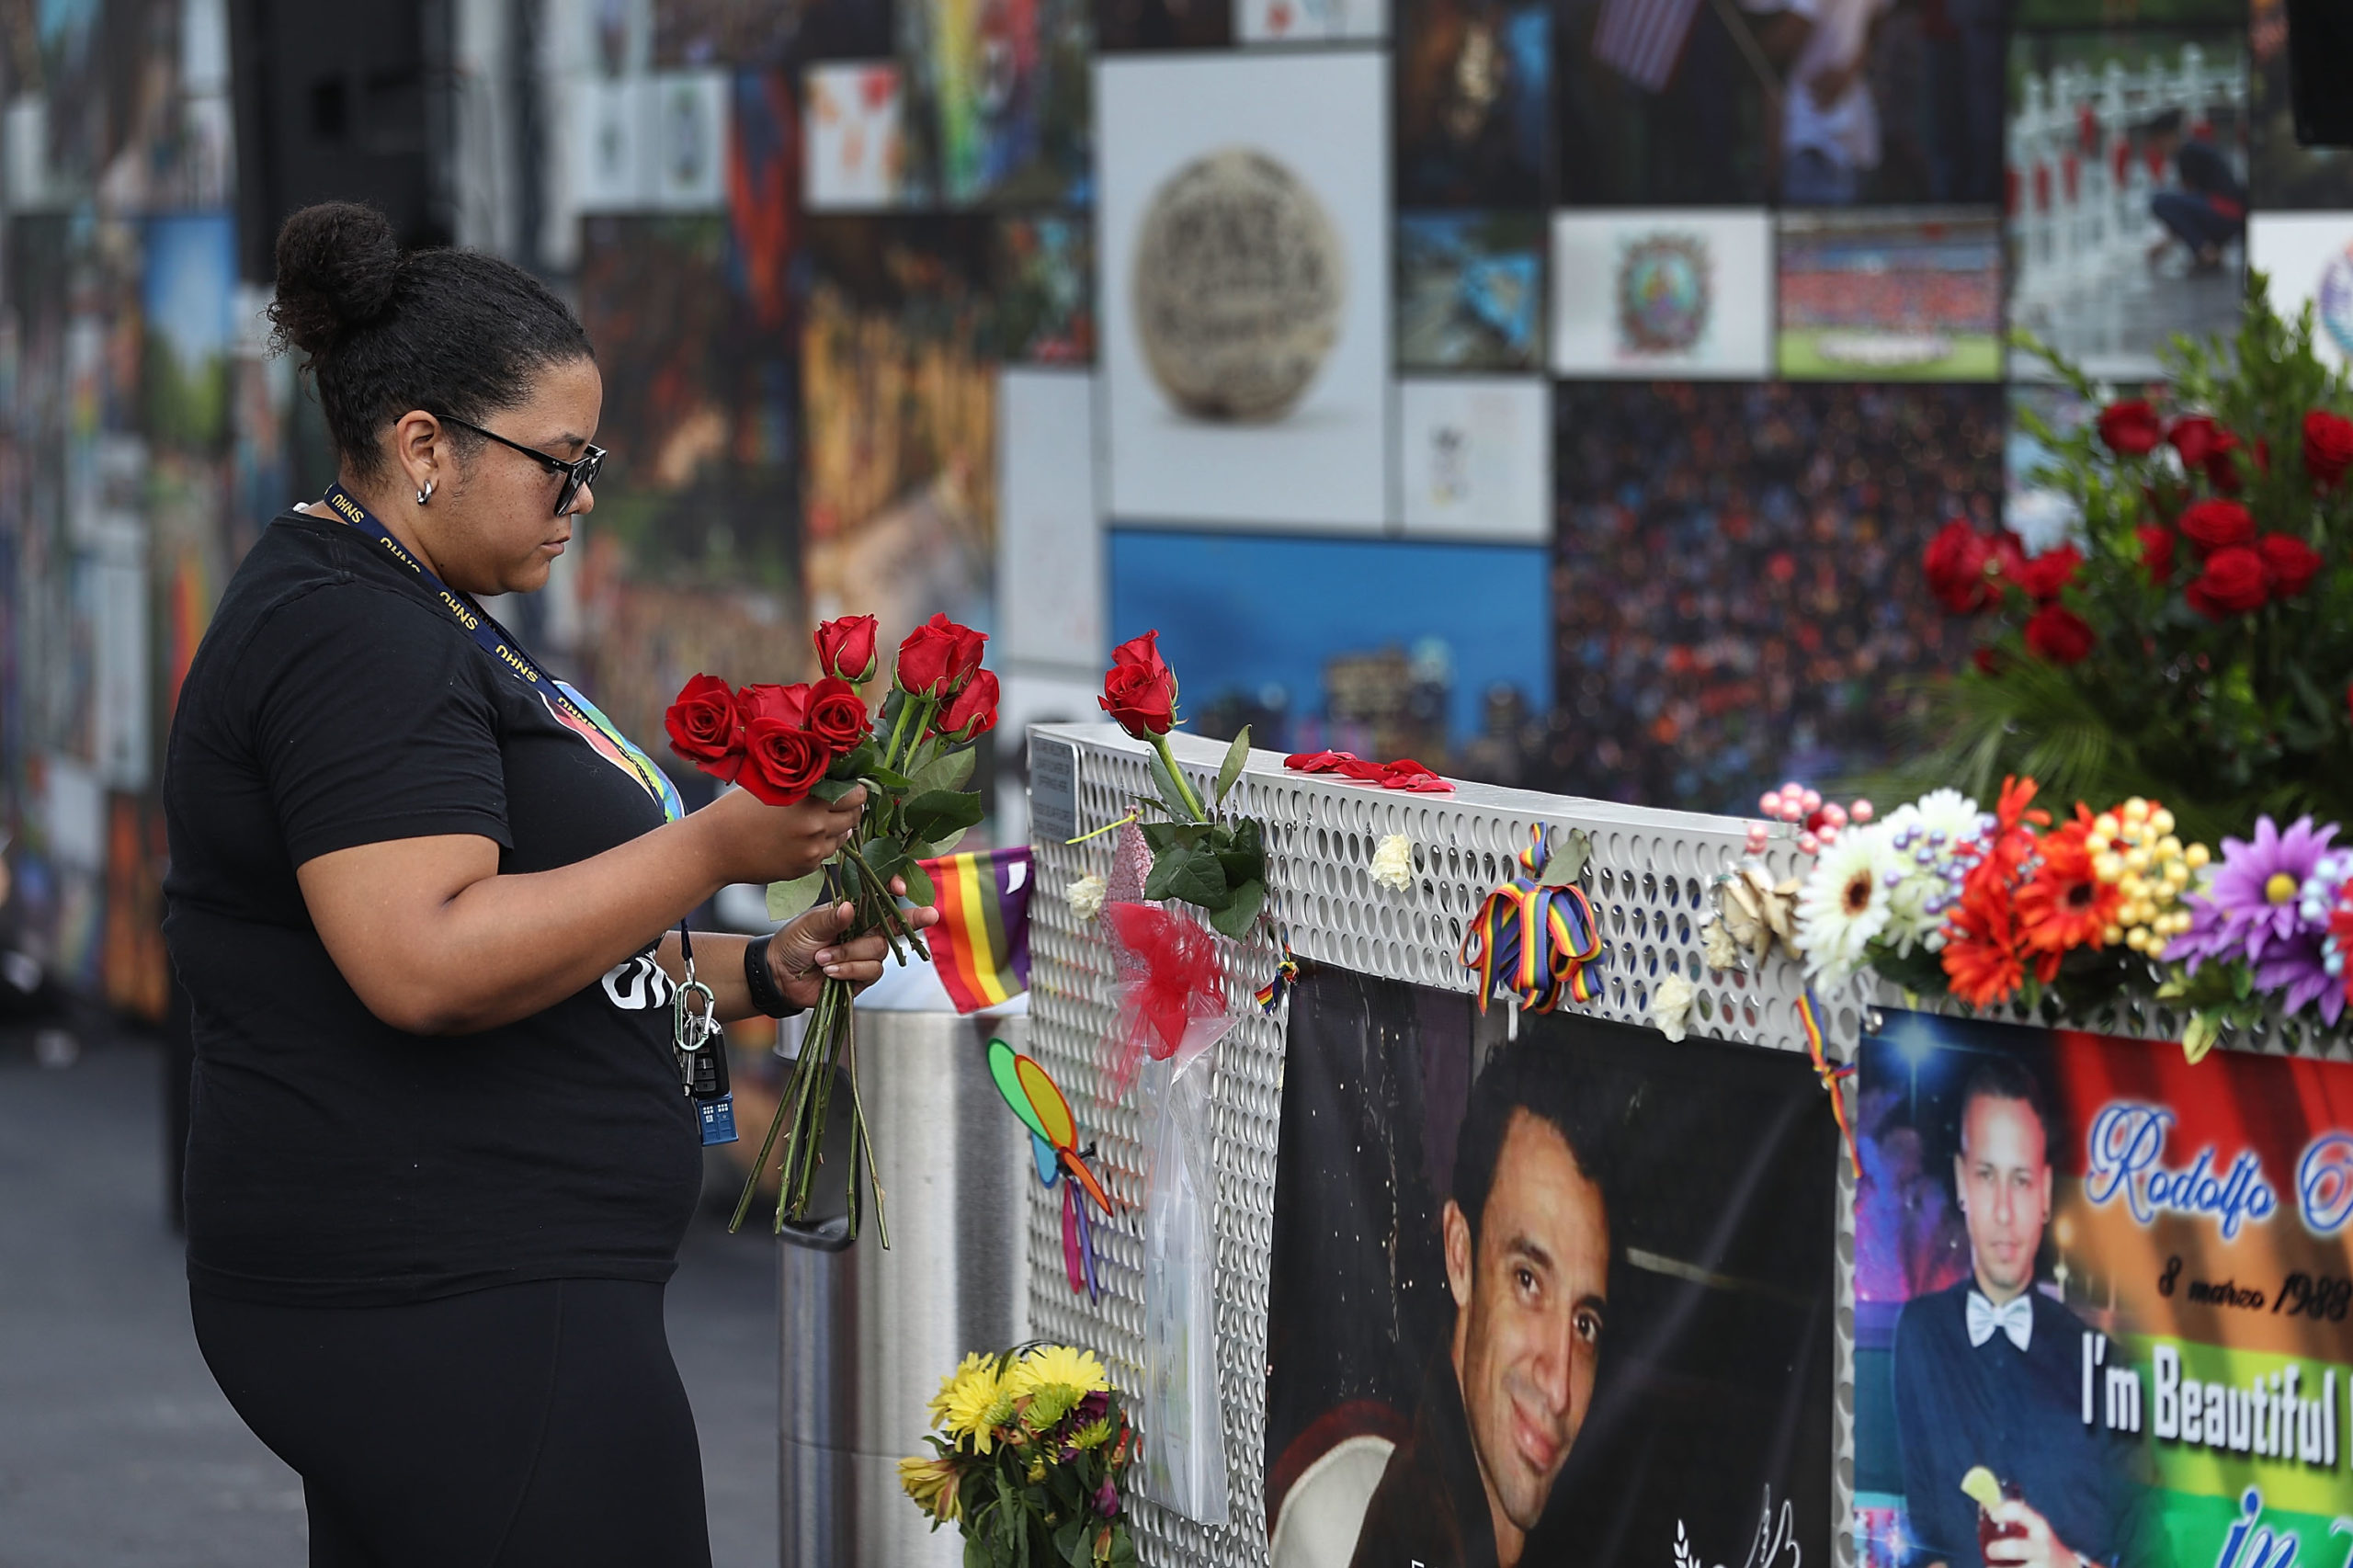 ORLANDO, FL - JUNE 12: Bianca Booker places flowers on a fence at the memorial set up for the shooting victims at Pulse nightclub where the shootings took place two years ago on June 12, 2018 in Orlando, Florida. On June 12, 2016 a mass shooting took place at Pulse nightclub killing 49 people and wounding 53 in one of the worst mass shootings in U.S. history. (Photo by Joe Raedle/Getty Images)